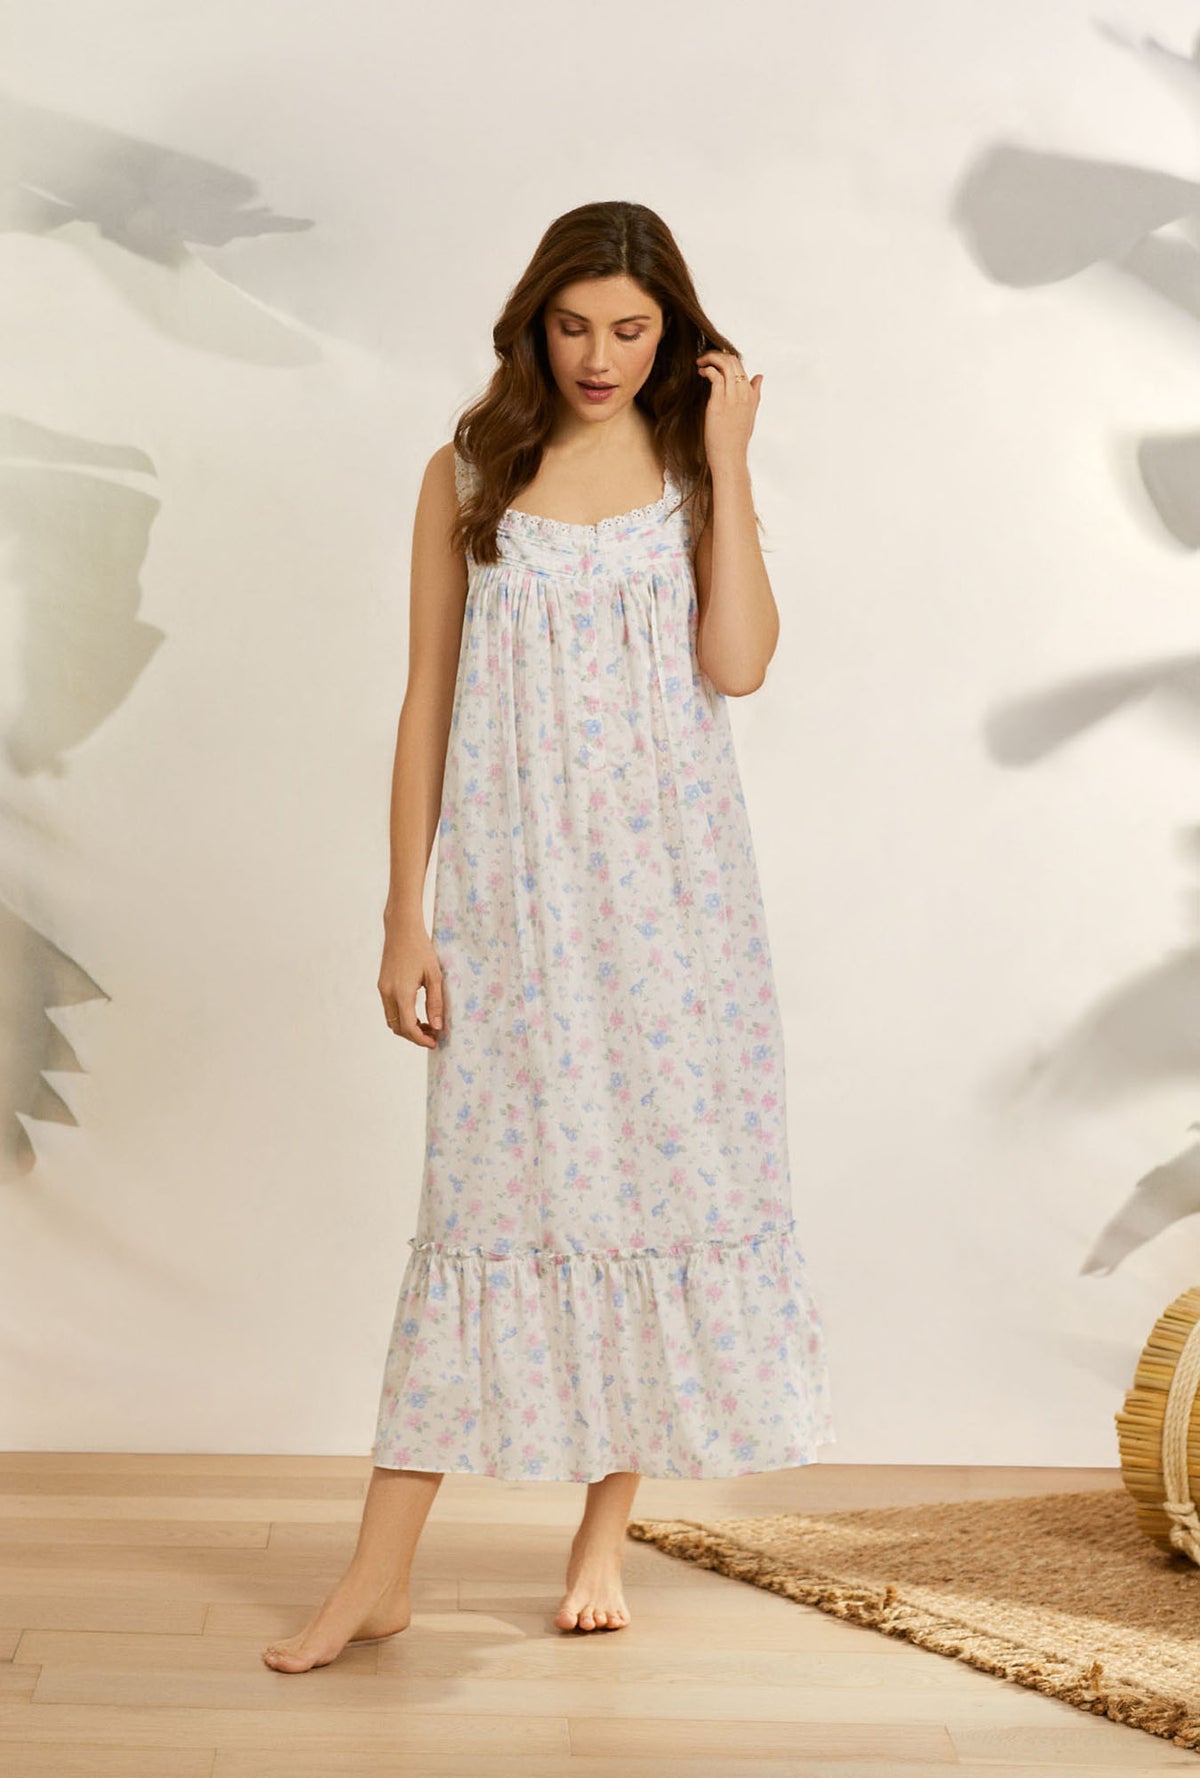 A lady wearing white sleeveless eileen nightgown with delicate floral print.